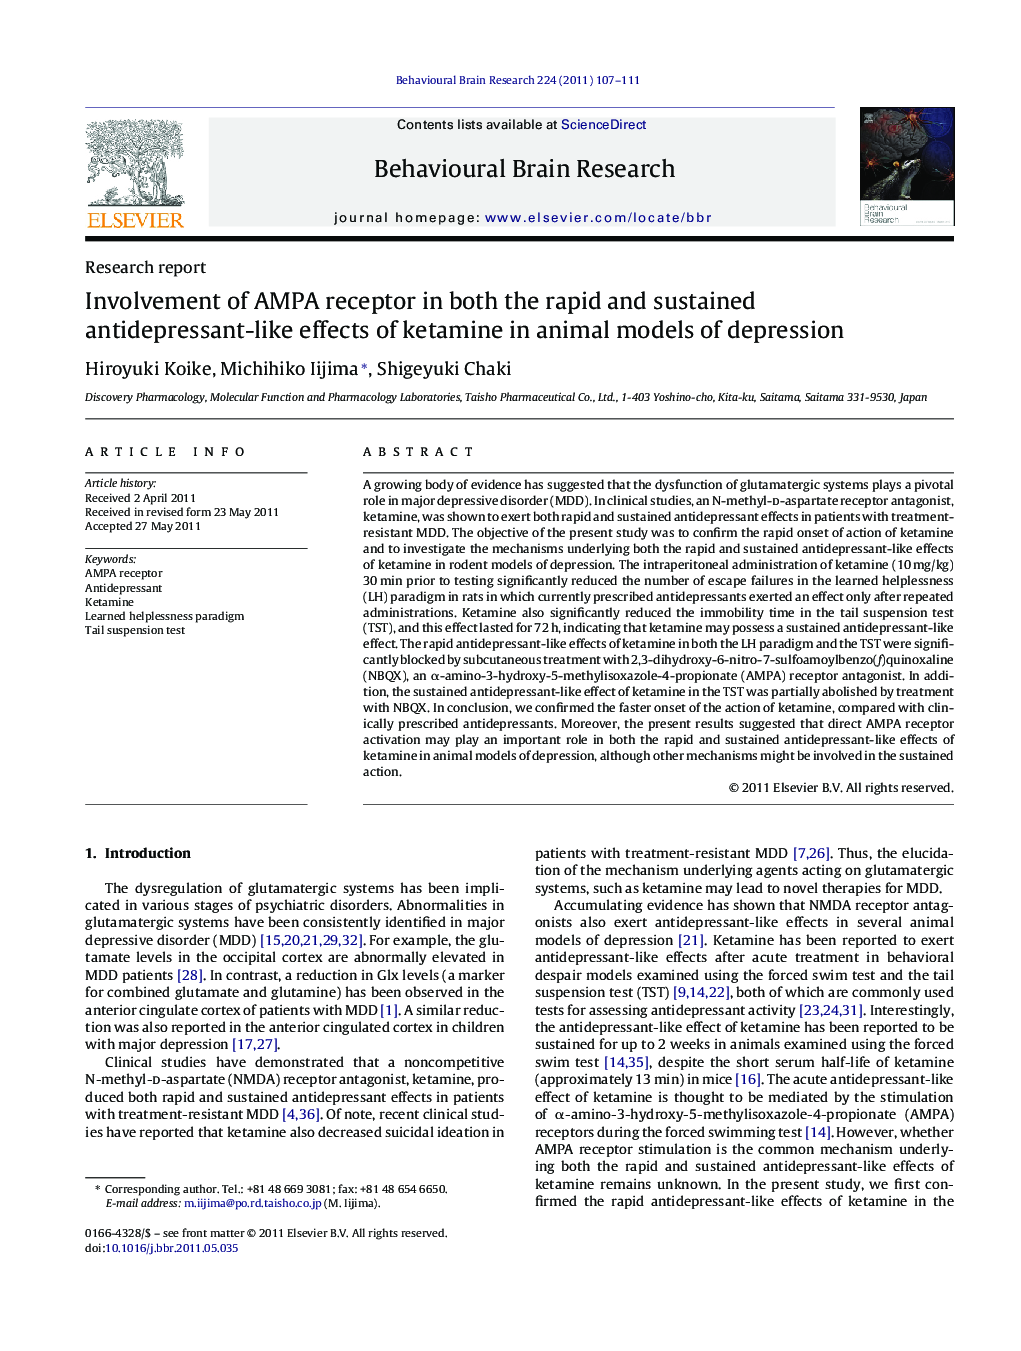 Research reportInvolvement of AMPA receptor in both the rapid and sustained antidepressant-like effects of ketamine in animal models of depression